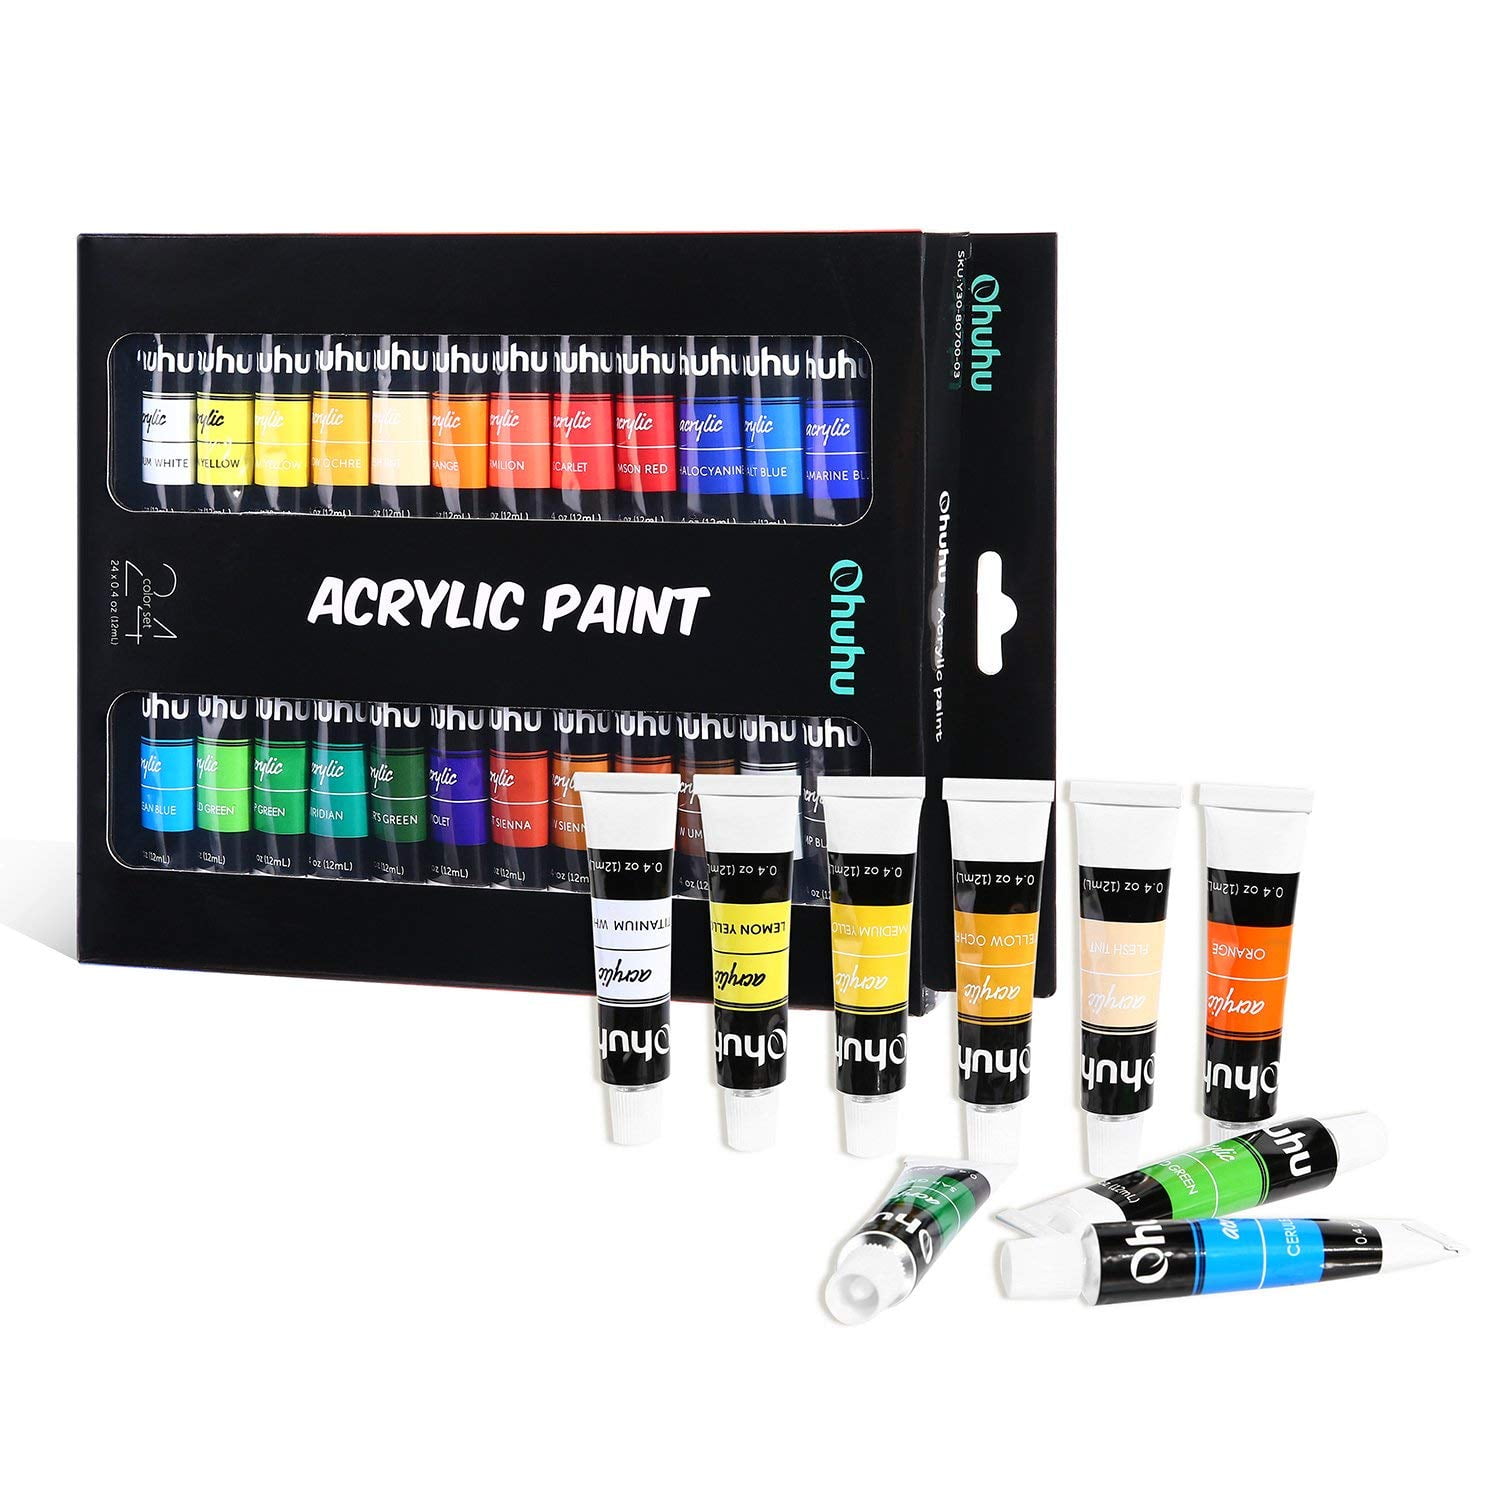 Outdoor Acrylic Paint for Metal, Ohuhu 24 Colors Art Craft Paint Set, 18  Basic and 6 Metallic Acrylic Paints (60ml, 2oz.) with 6 Brushes, Waterproof